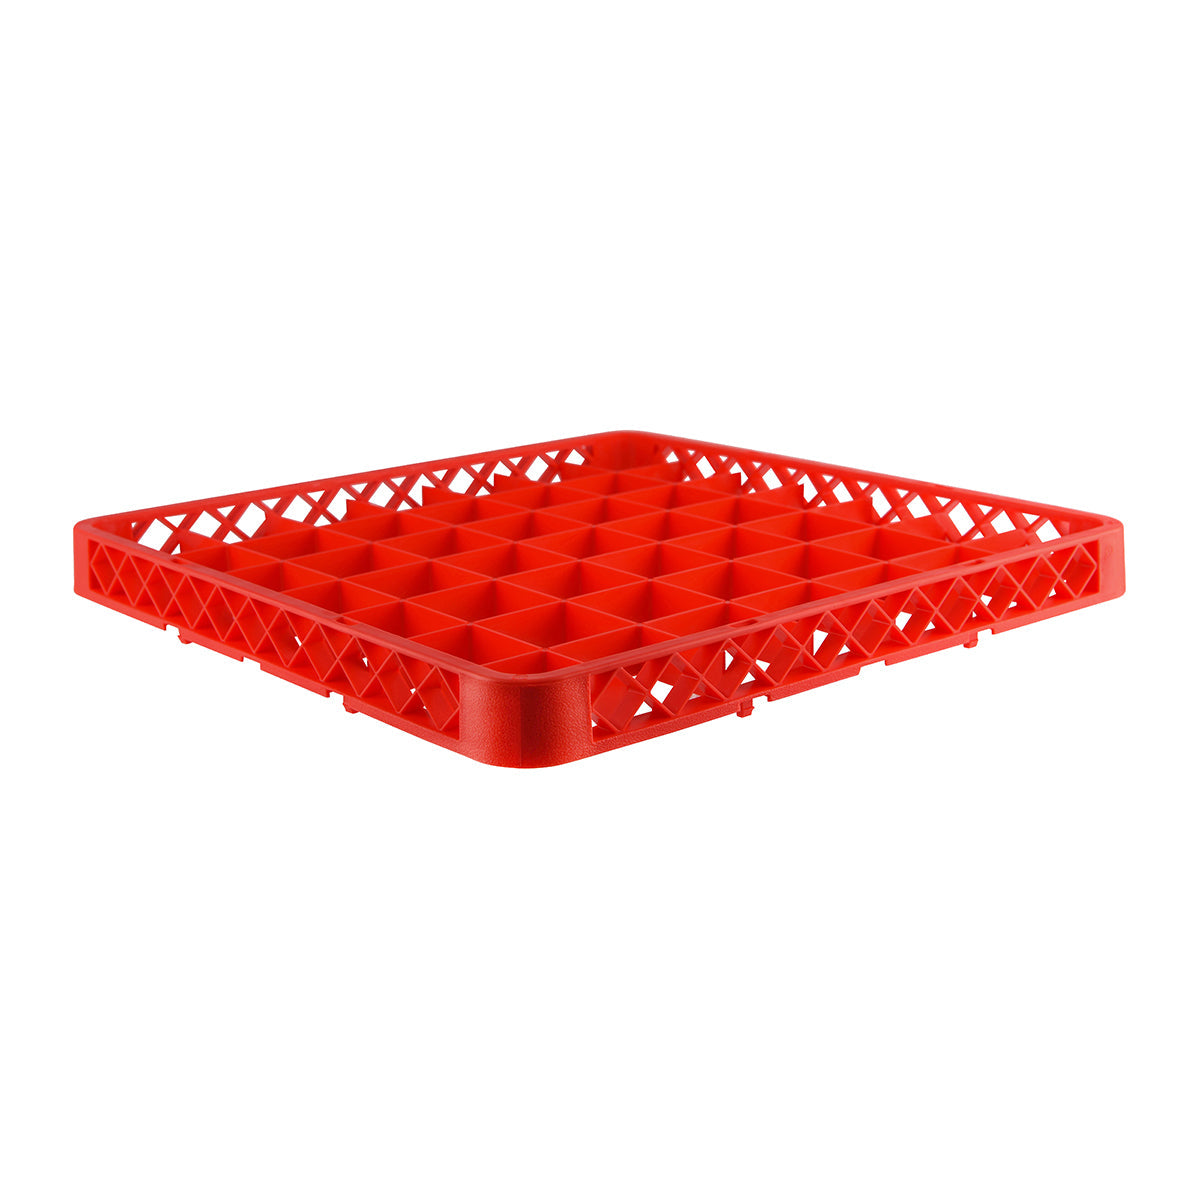 69850-RD Chef Inox Wash Rack Extender 49 Compartment Red 500x500x45mm Tomkin Australia Hospitality Supplies